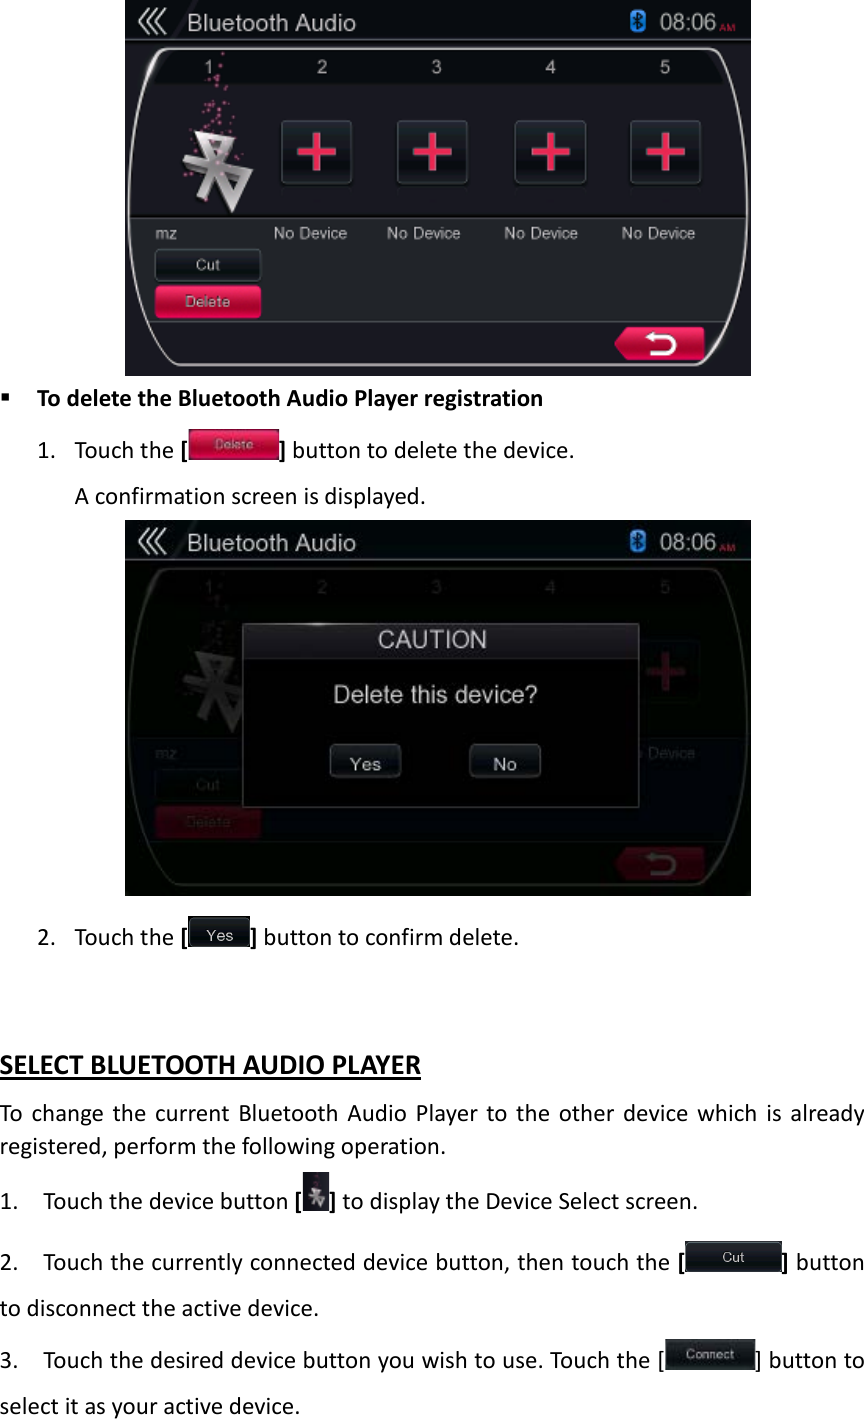              To delete the Bluetooth Audio Player registration 1. Touch the [] button to delete the device. A confirmation screen is displayed.             2. Touch the [ ] button to confirm delete.  SELECT BLUETOOTH AUDIO PLAYER To change the current Bluetooth Audio Player to the other device which is already registered, perform the following operation. 1. Touch the device button [ ] to display the Device Select screen. 2. Touch the currently connected device button, then touch the [ ] button to disconnect the active device.   3. Touch the desired device button you wish to use. Touch the [ ] button to select it as your active device.   